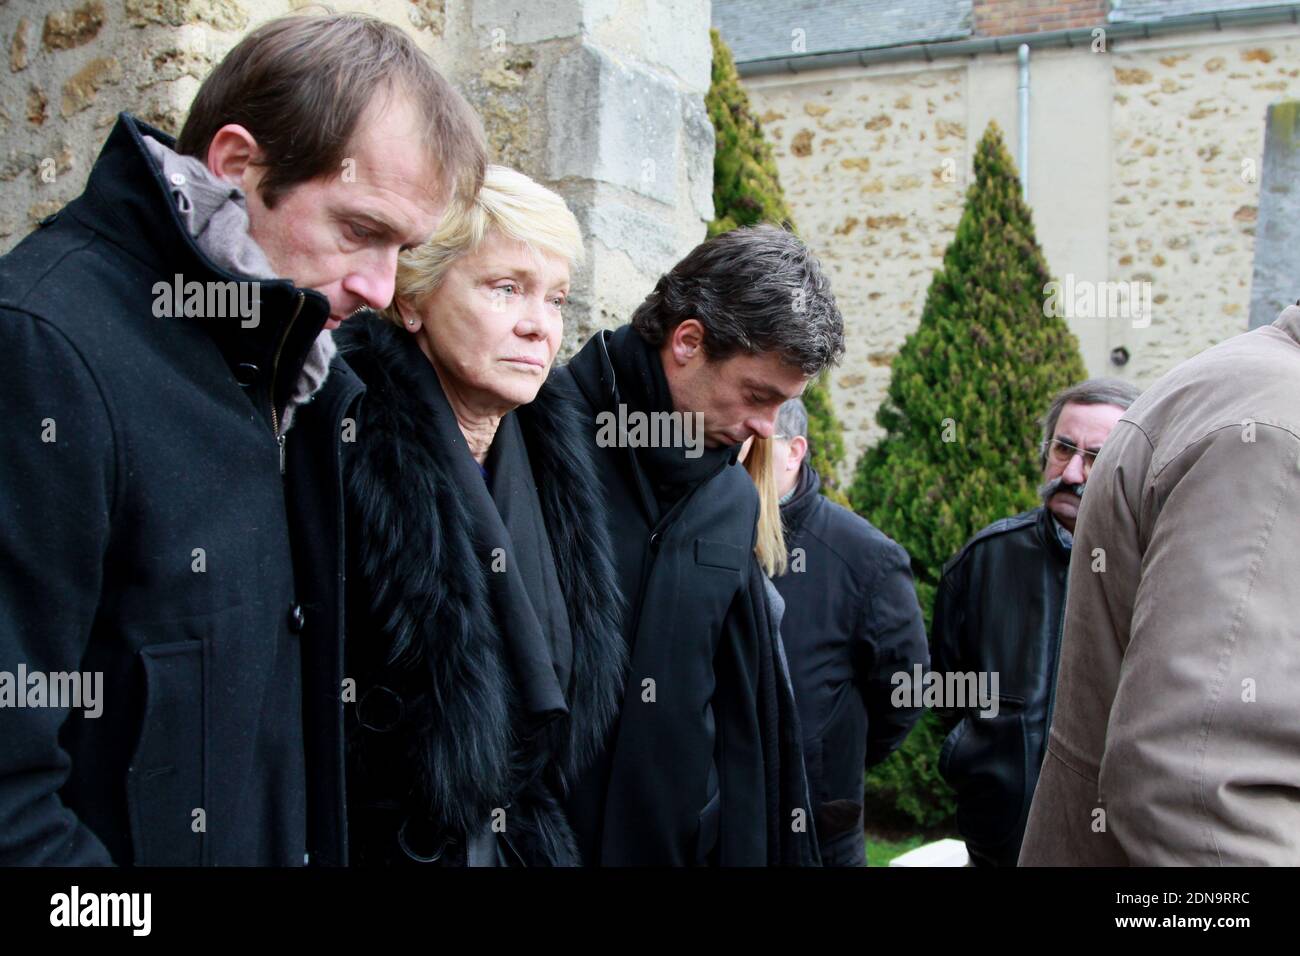 Jacqueline Beltoise with her sons Julien and Anthony attending the Jean-Pierre  Beltoise funeral ceremony in Saint-Vrain, France on January 12, 2015. Photo  by ABACAPRESS.COM Stock Photo - Alamy